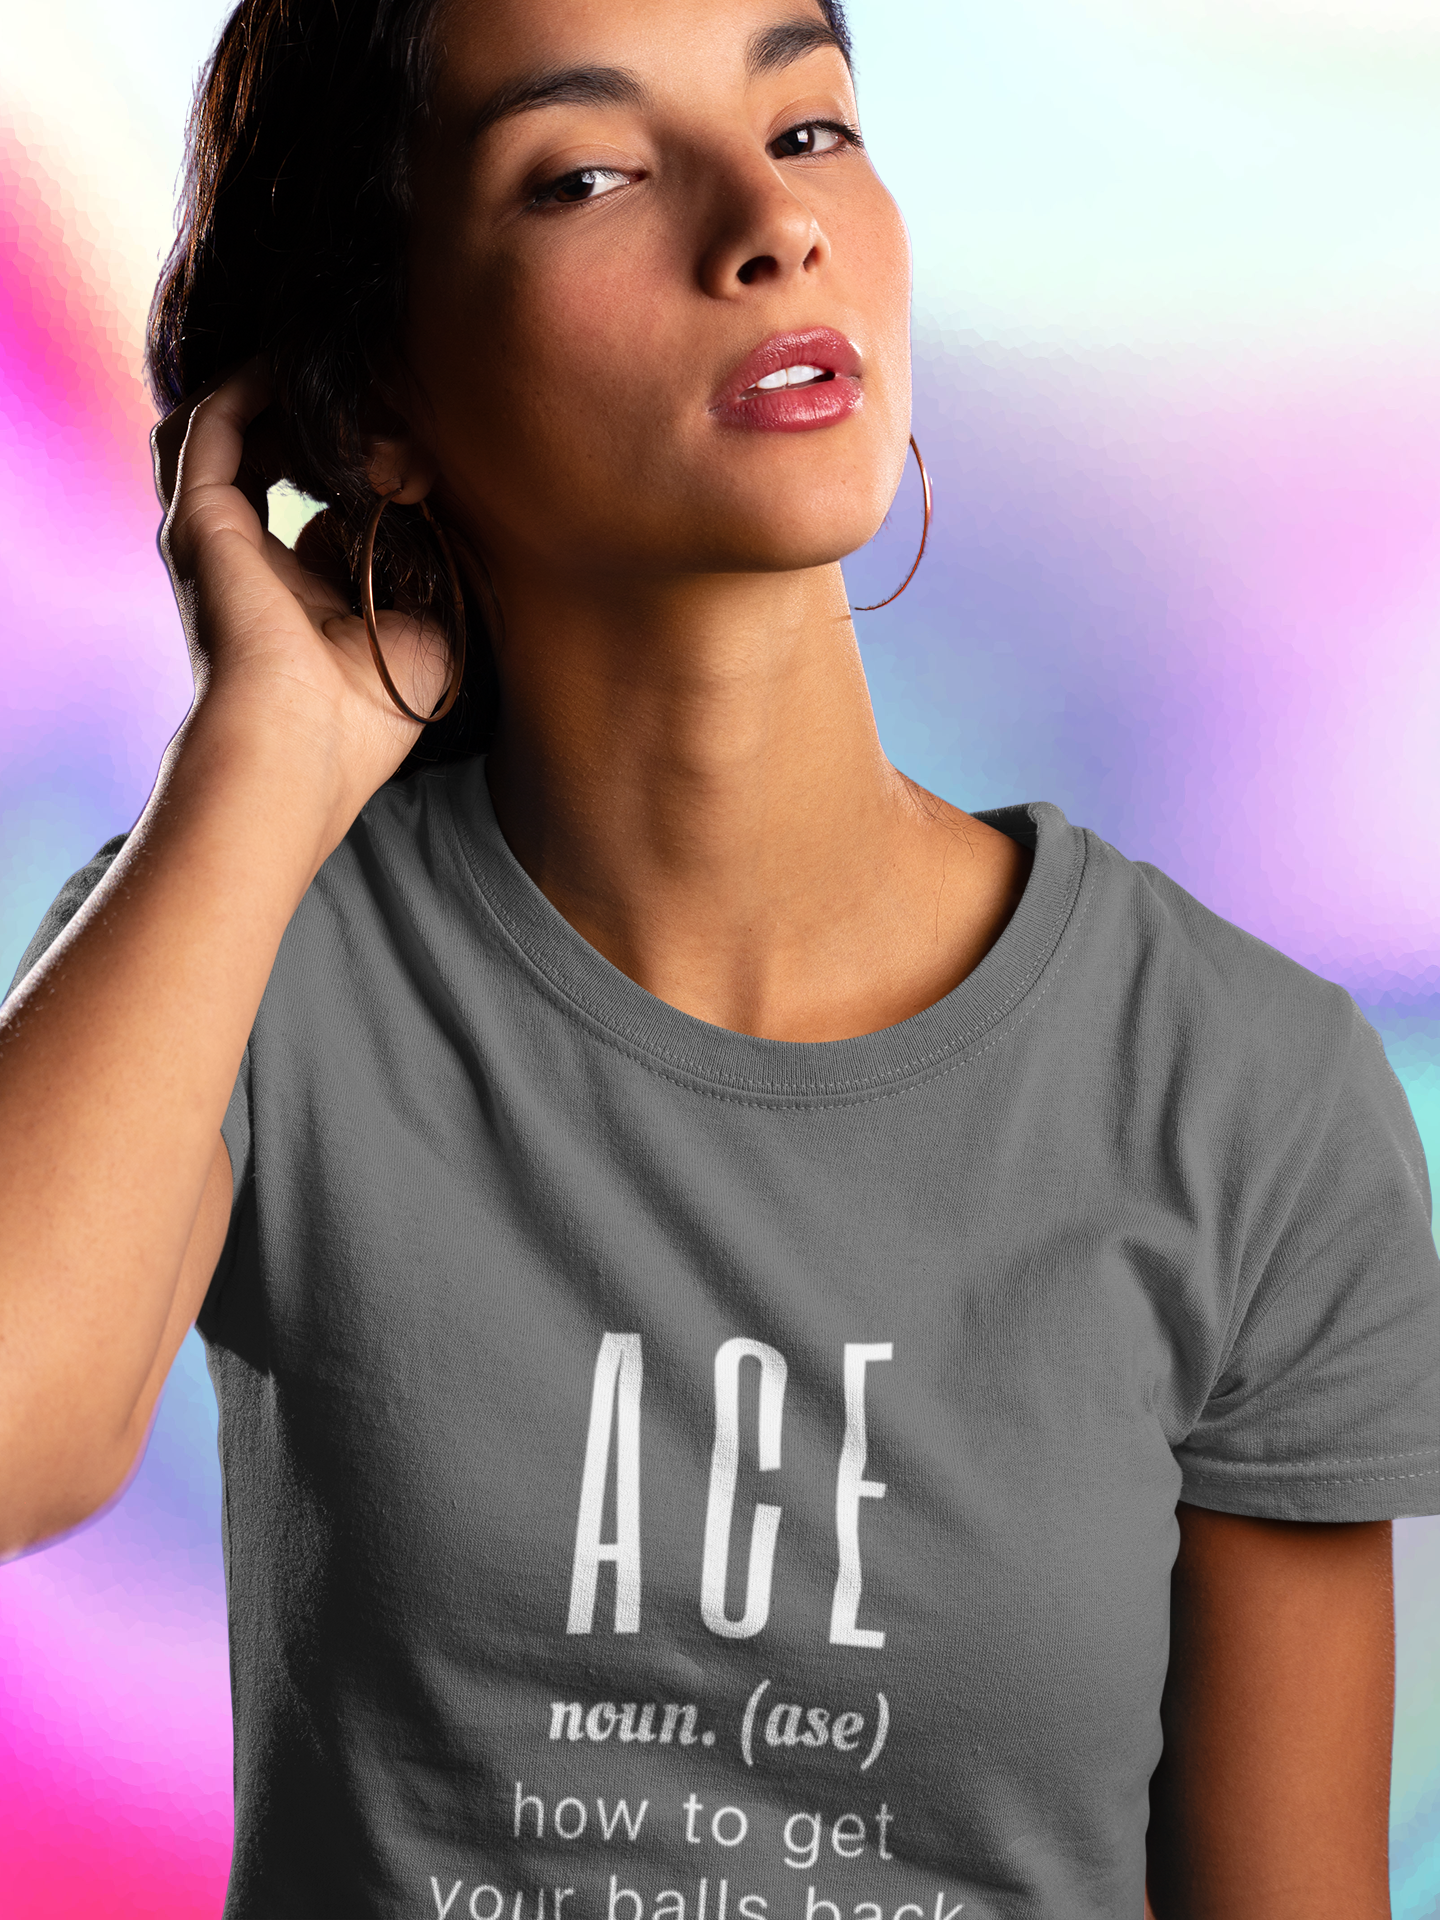 The ACE volleyball definition featuring the How to get your balls back shirt.When you're the server for your team and you serve a ball either a float serve or a jump serve, so tough that the opposing can't get it back over the net